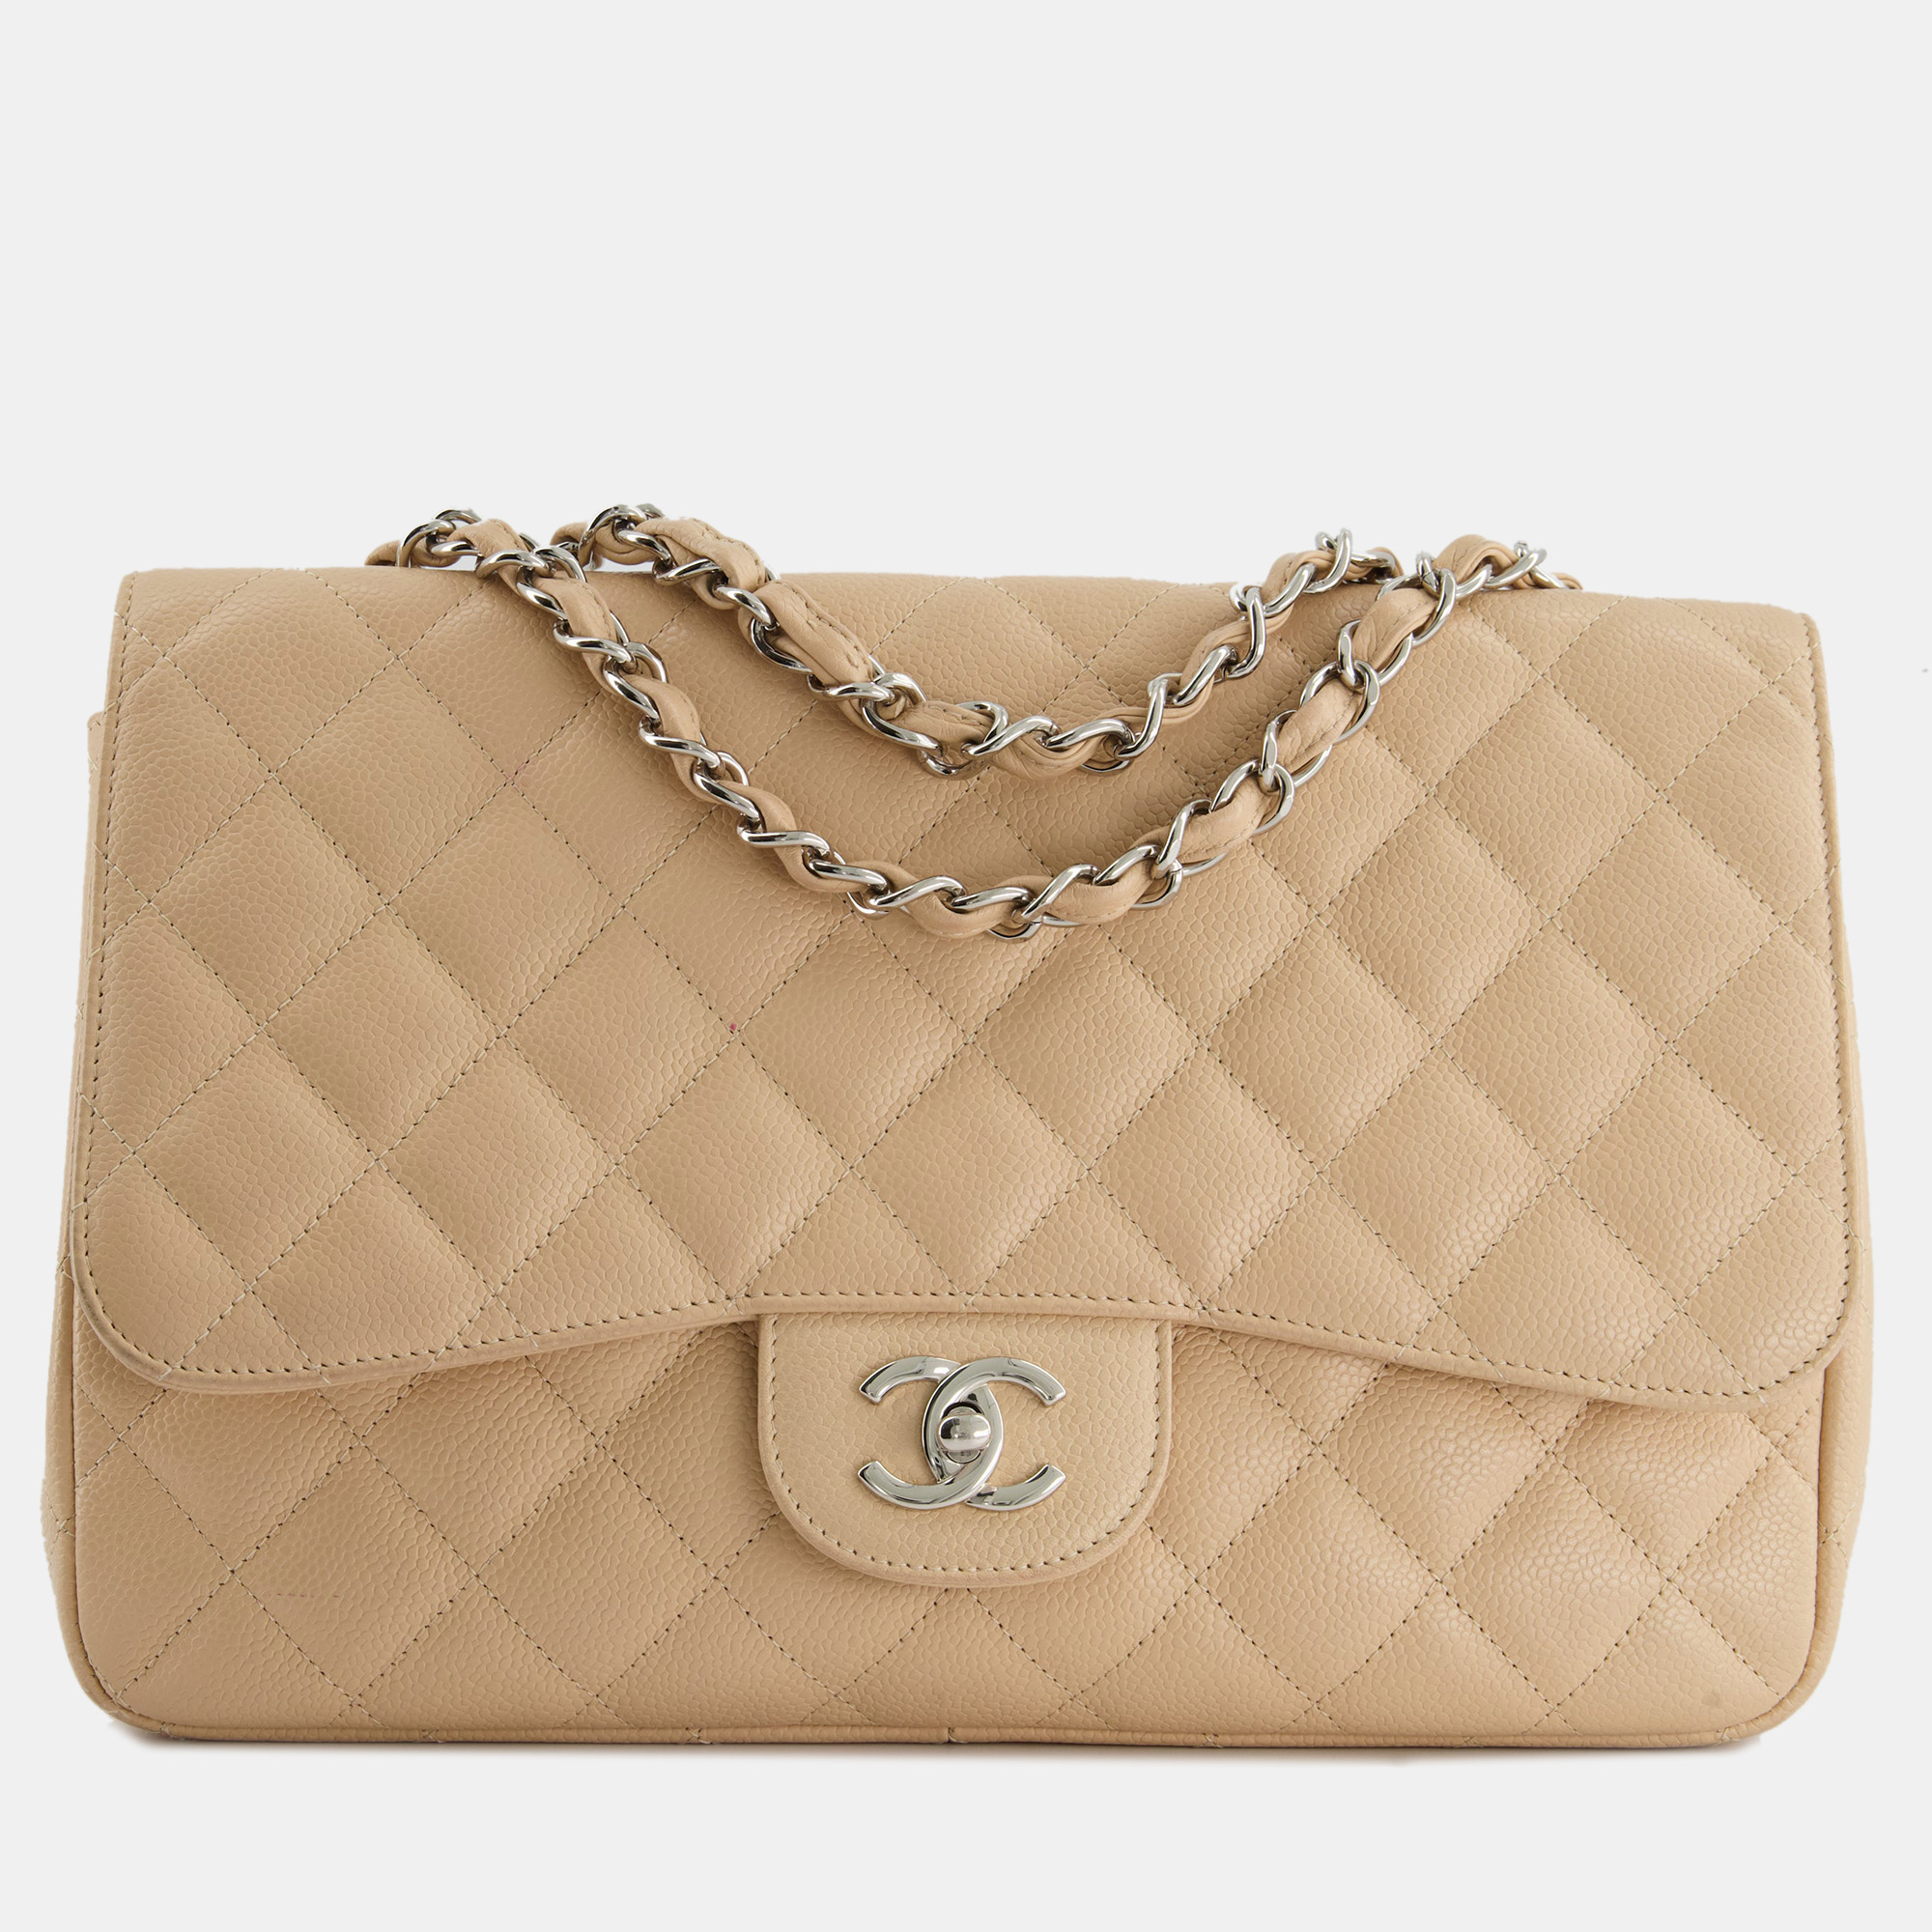 Chanel beige classic jumbo stitched edge single flap bag in caviar leather with silver hardware